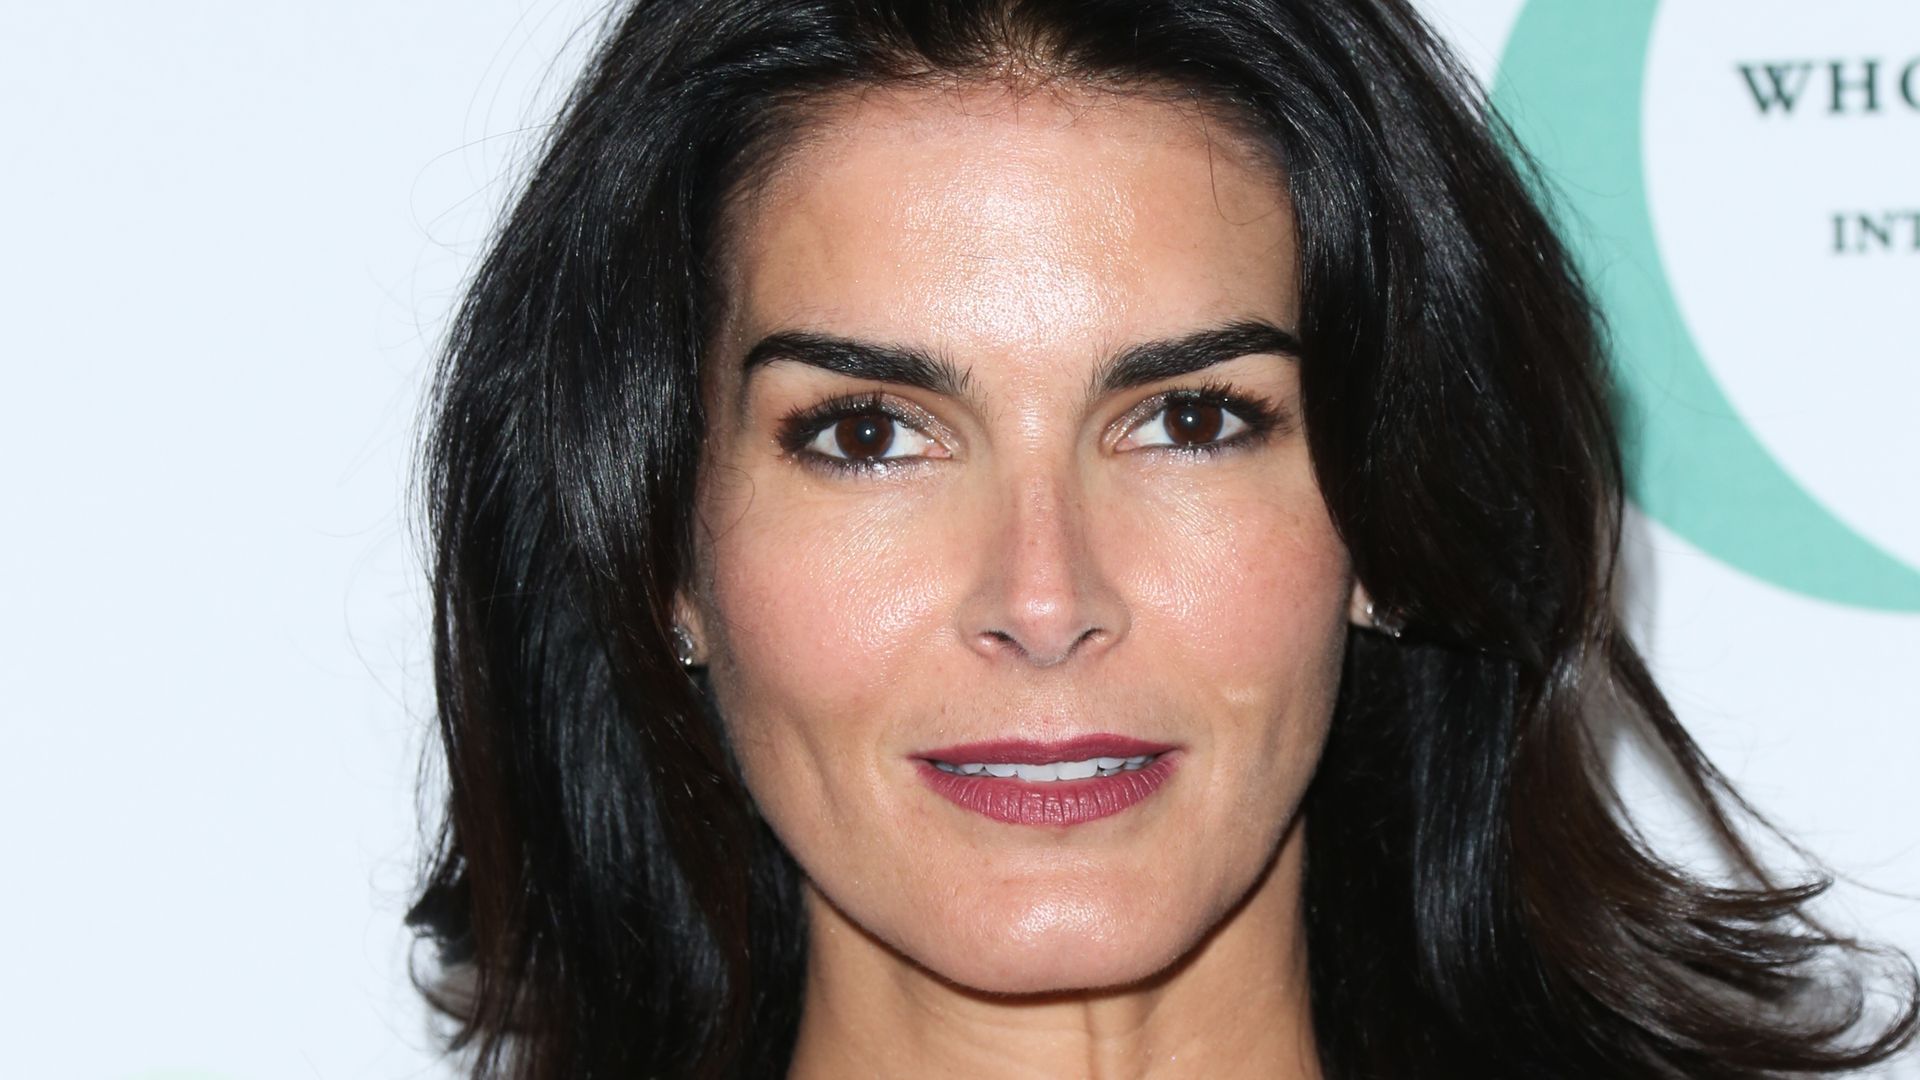 Angie Harmon 'traumatized' after Instacart driver 'shot & killed' her dog during delivery